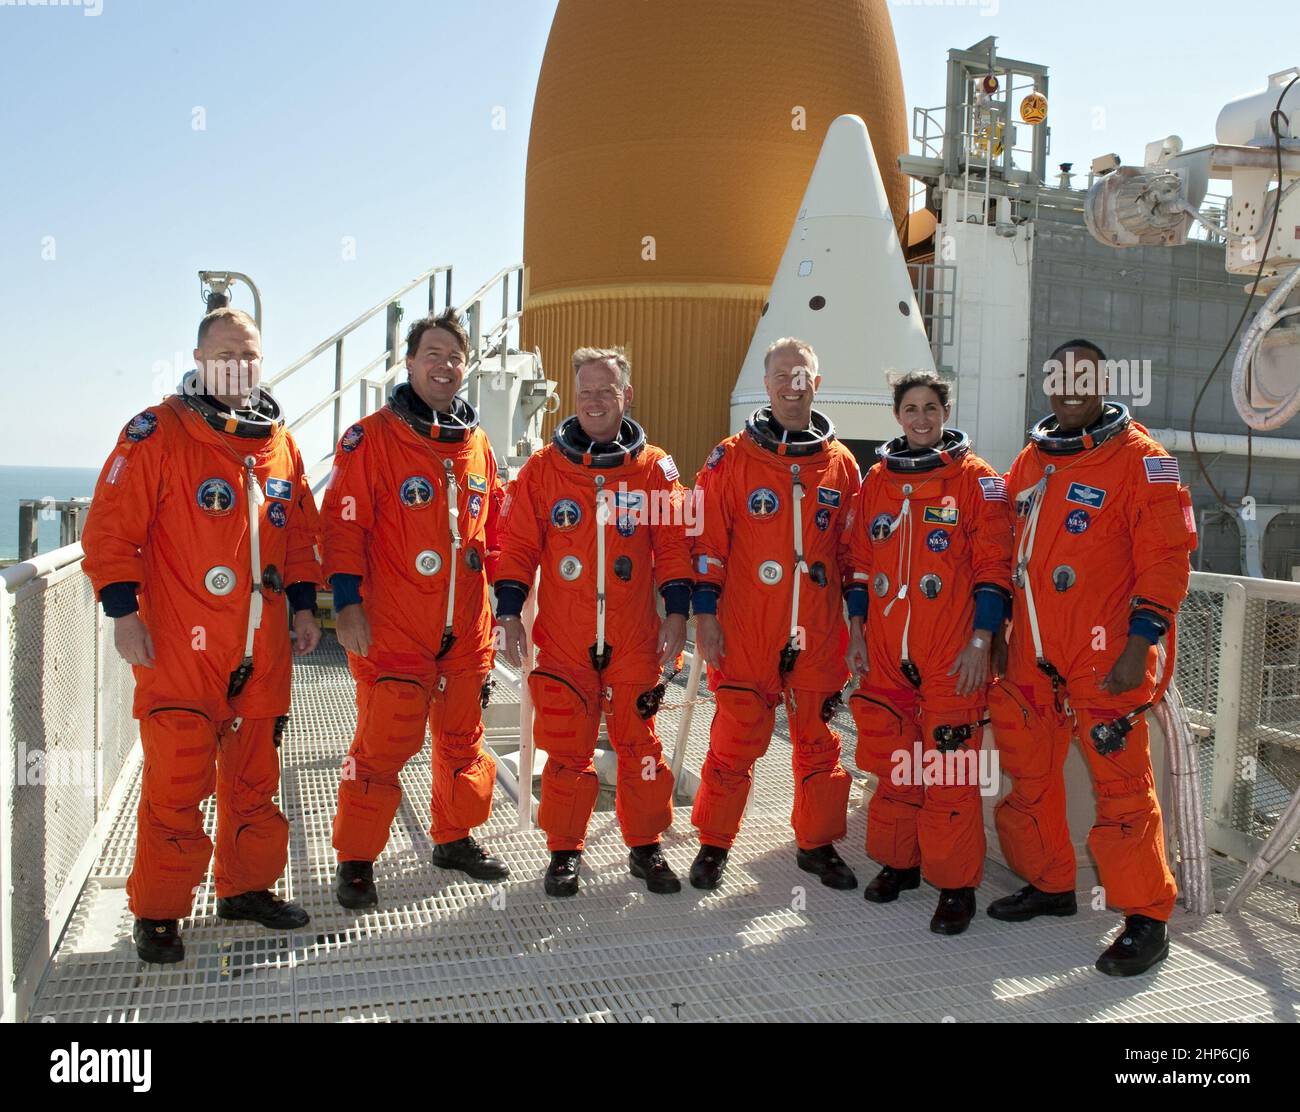 At NASA's Kennedy Space Center in Florida, the STS-133 crew takes a break from a simulated launch countdown and simulated pad emergency to take a group photo on the 195-foot level of Launch Pad 39A. From left are, Pilot Eric Boe, Mission Specialist Michael Barratt, Commander Steve Lindsey, and Mission Specialists Tim Kopra, Nicole Stott, and Alvin Drew ca. 2010 Stock Photo